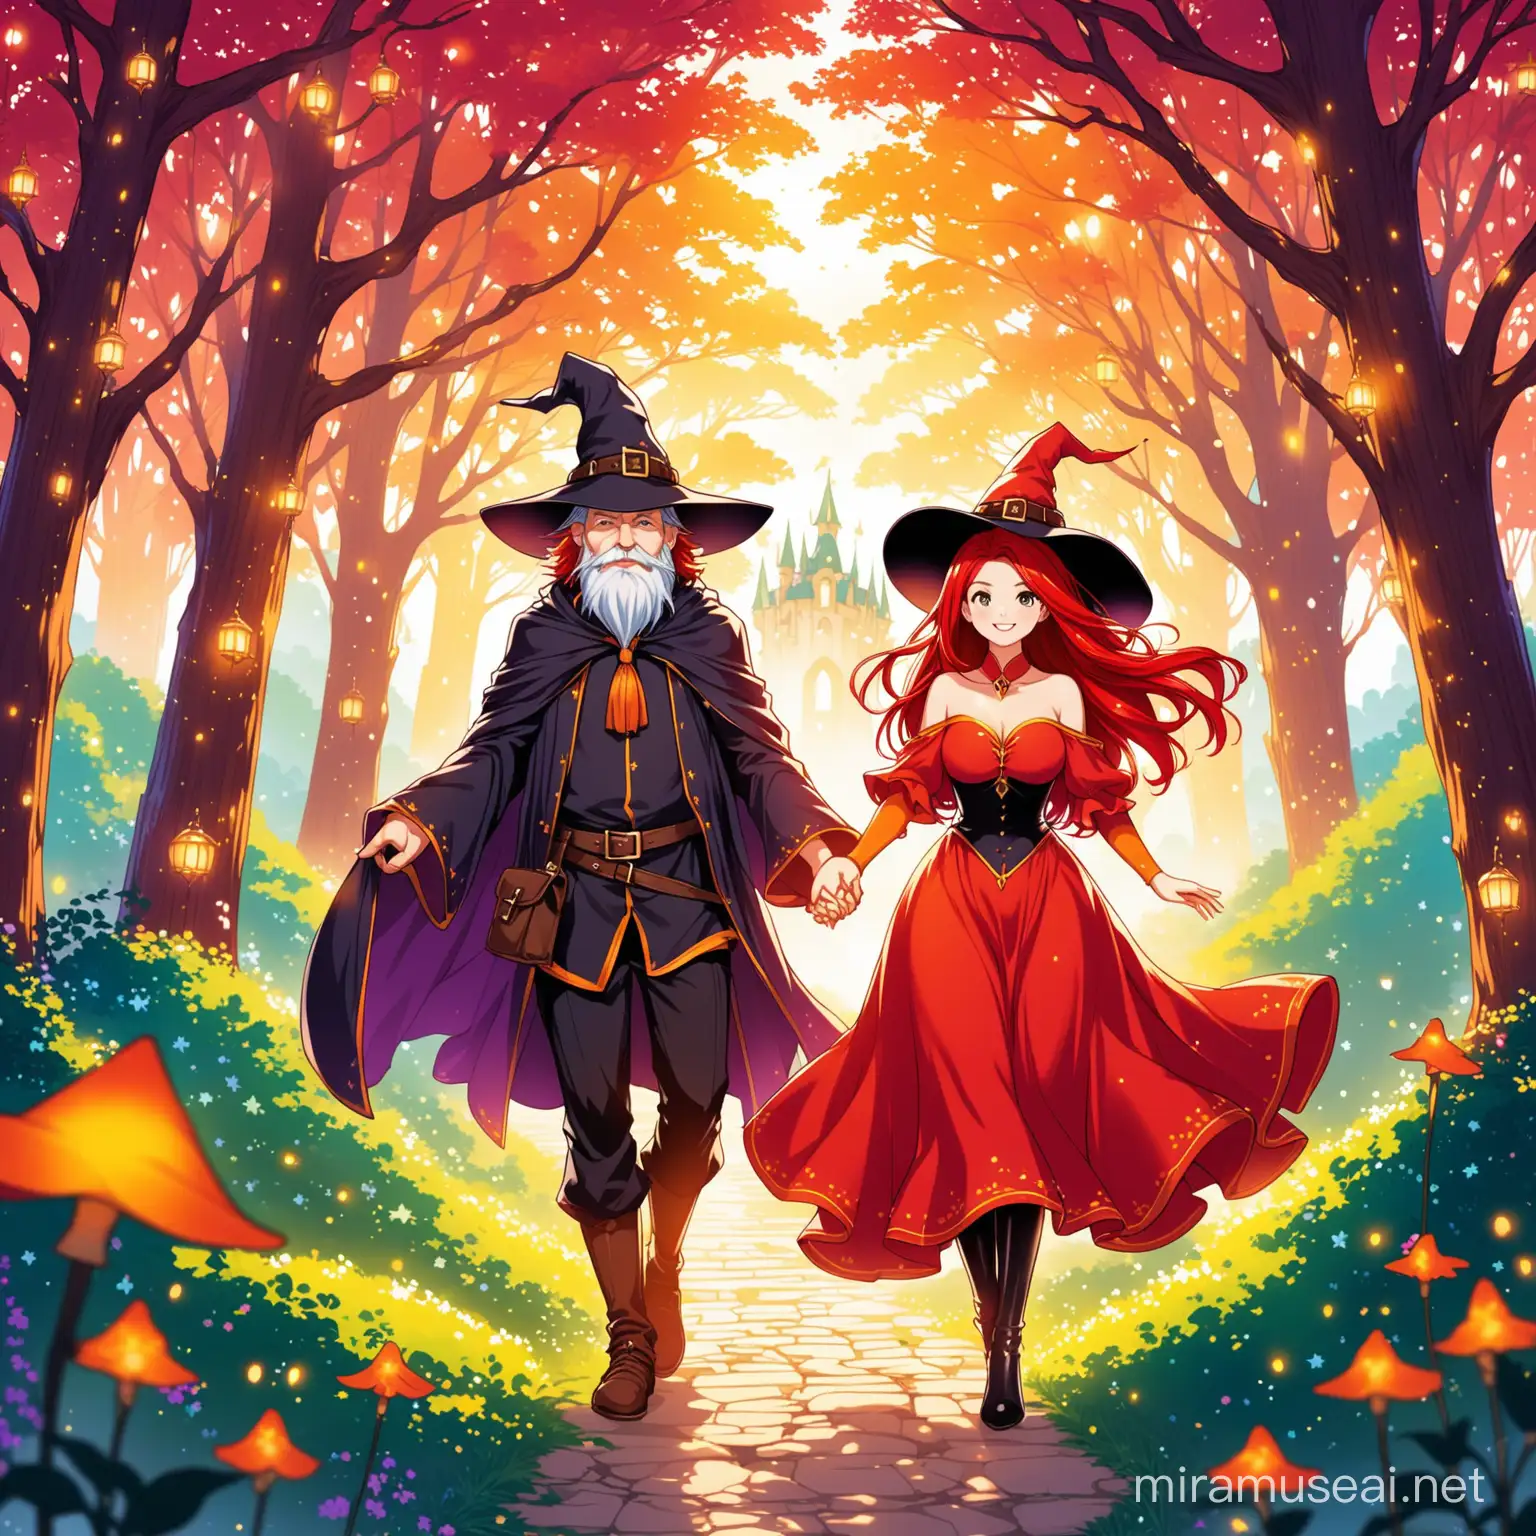 Enchanting RedHaired Witch and Wizard in Magical Setting